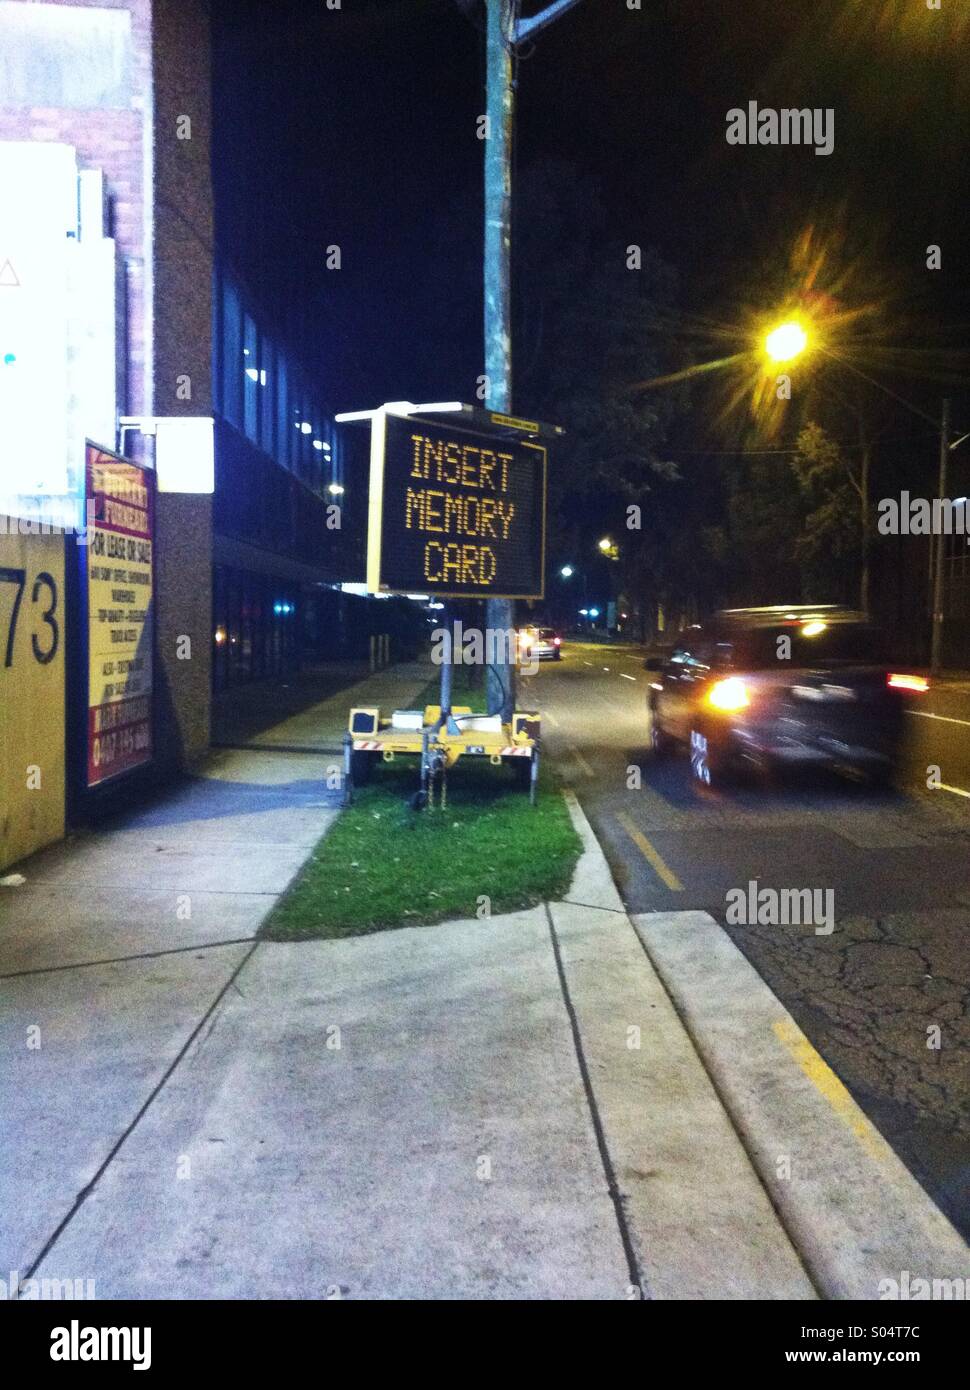 Insert memory card: faulty street work sign Stock Photo